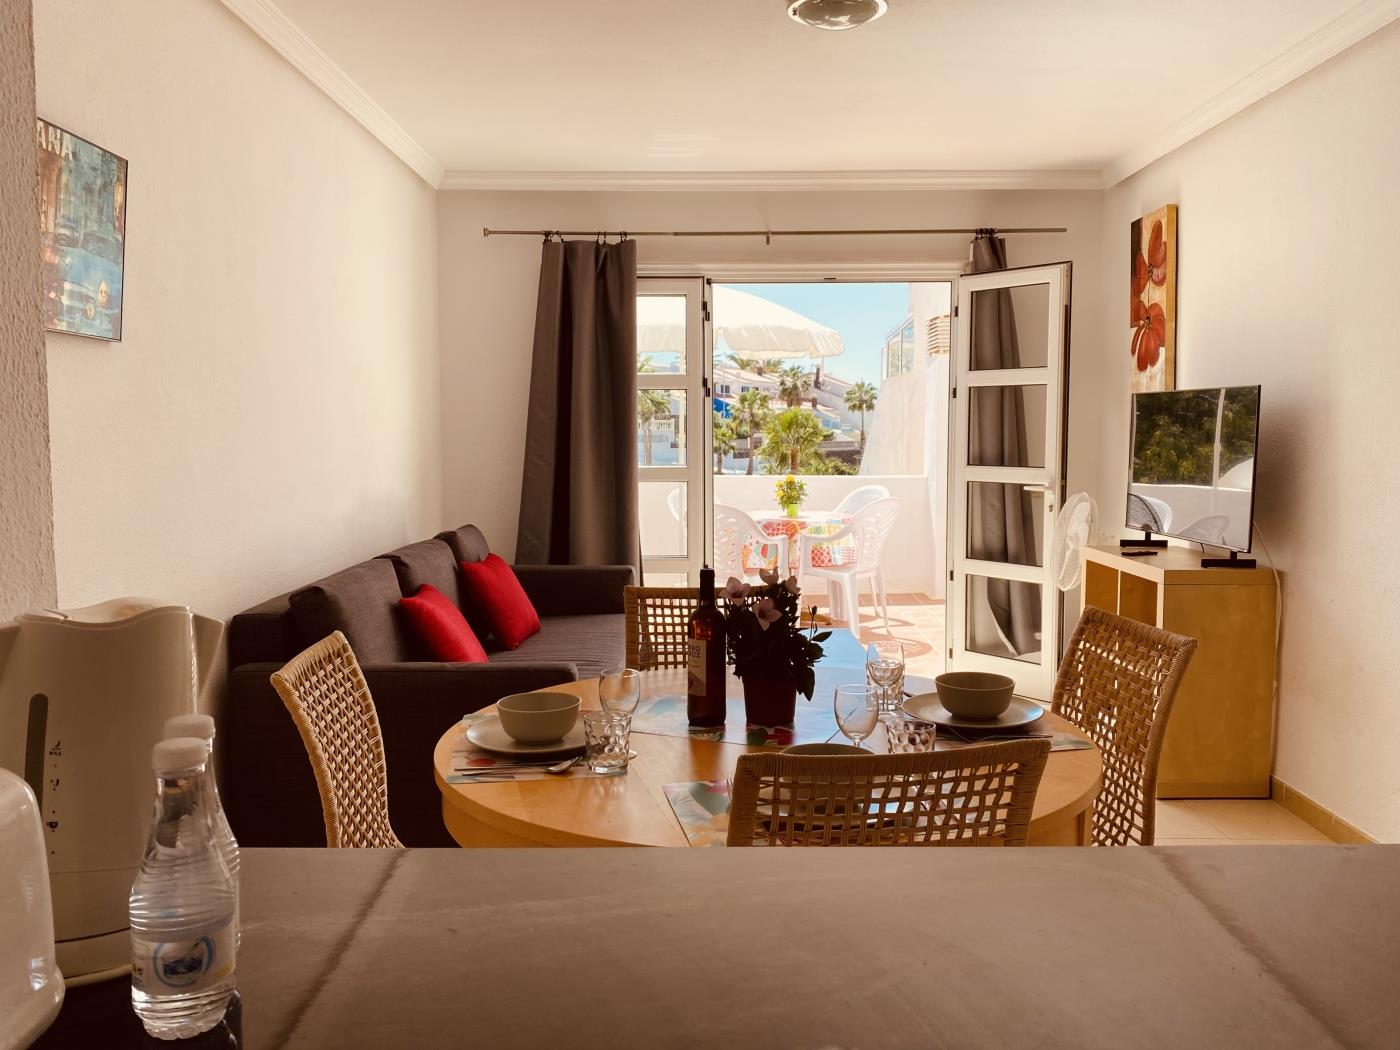 1-bedroom flat with sunny terrace and partial sea view in San Eugenio Alto